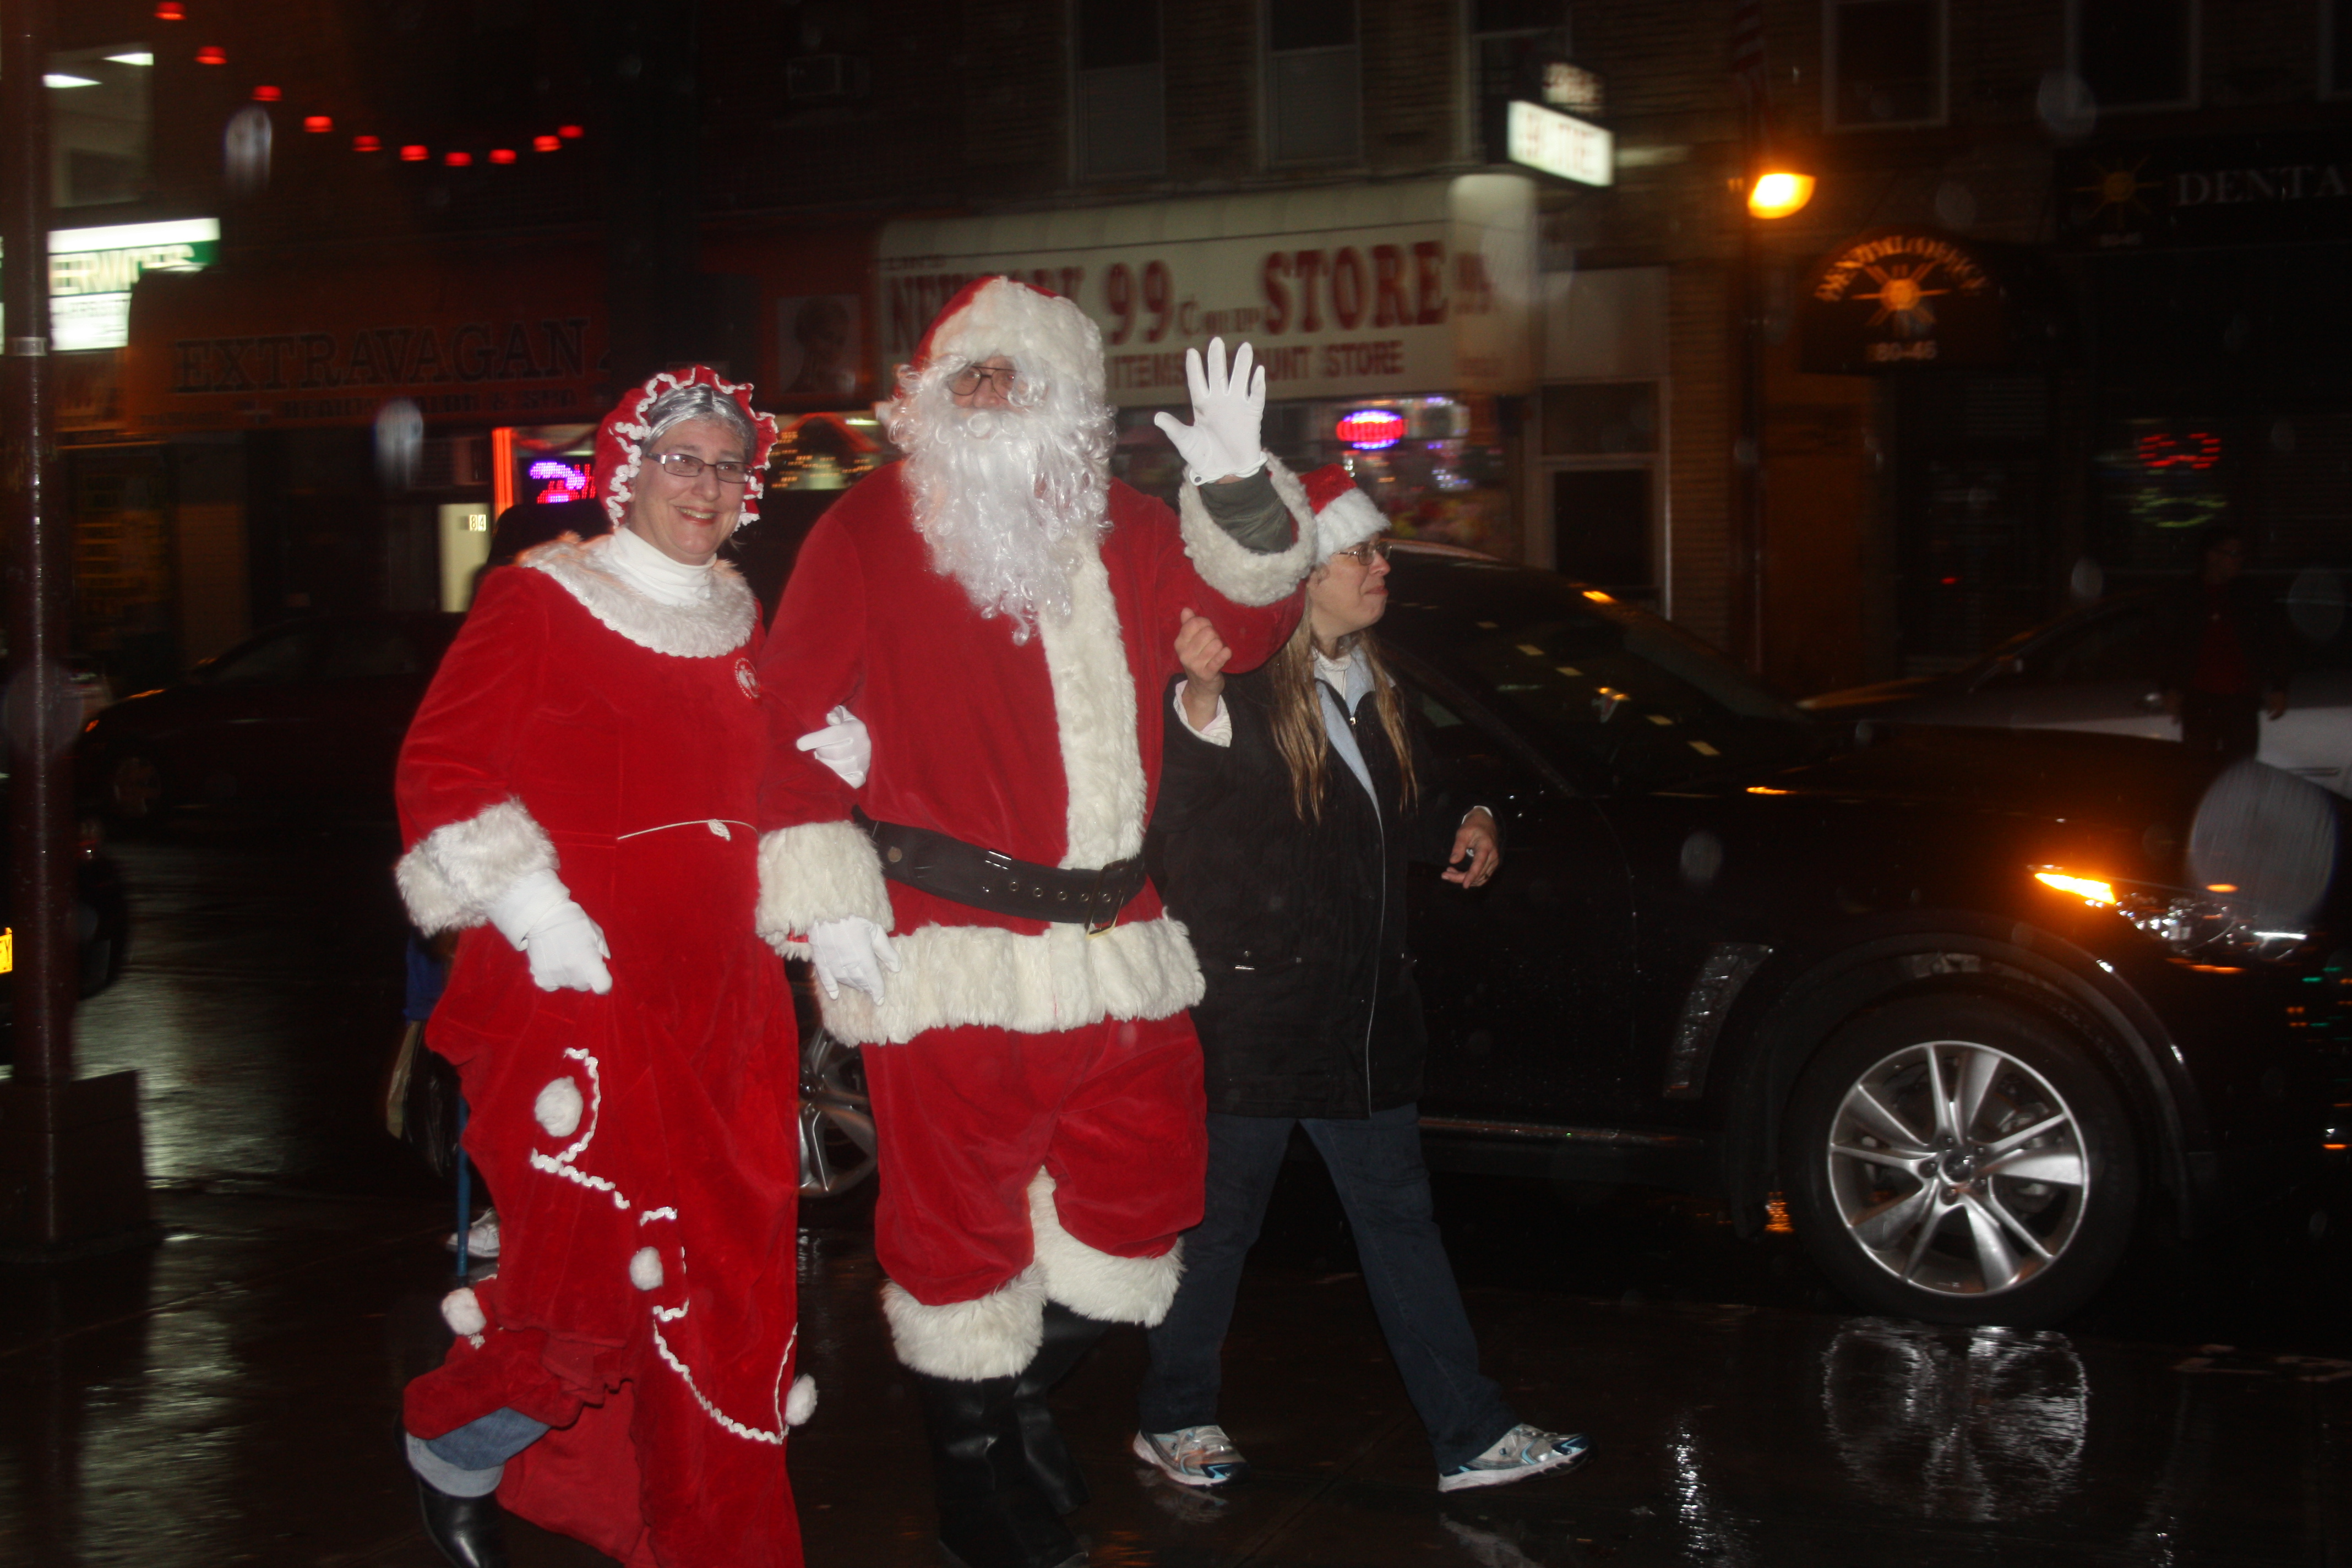 Santa and Mrs. Claus braved the rain and got a warm welcome from a cold and wet crowd.